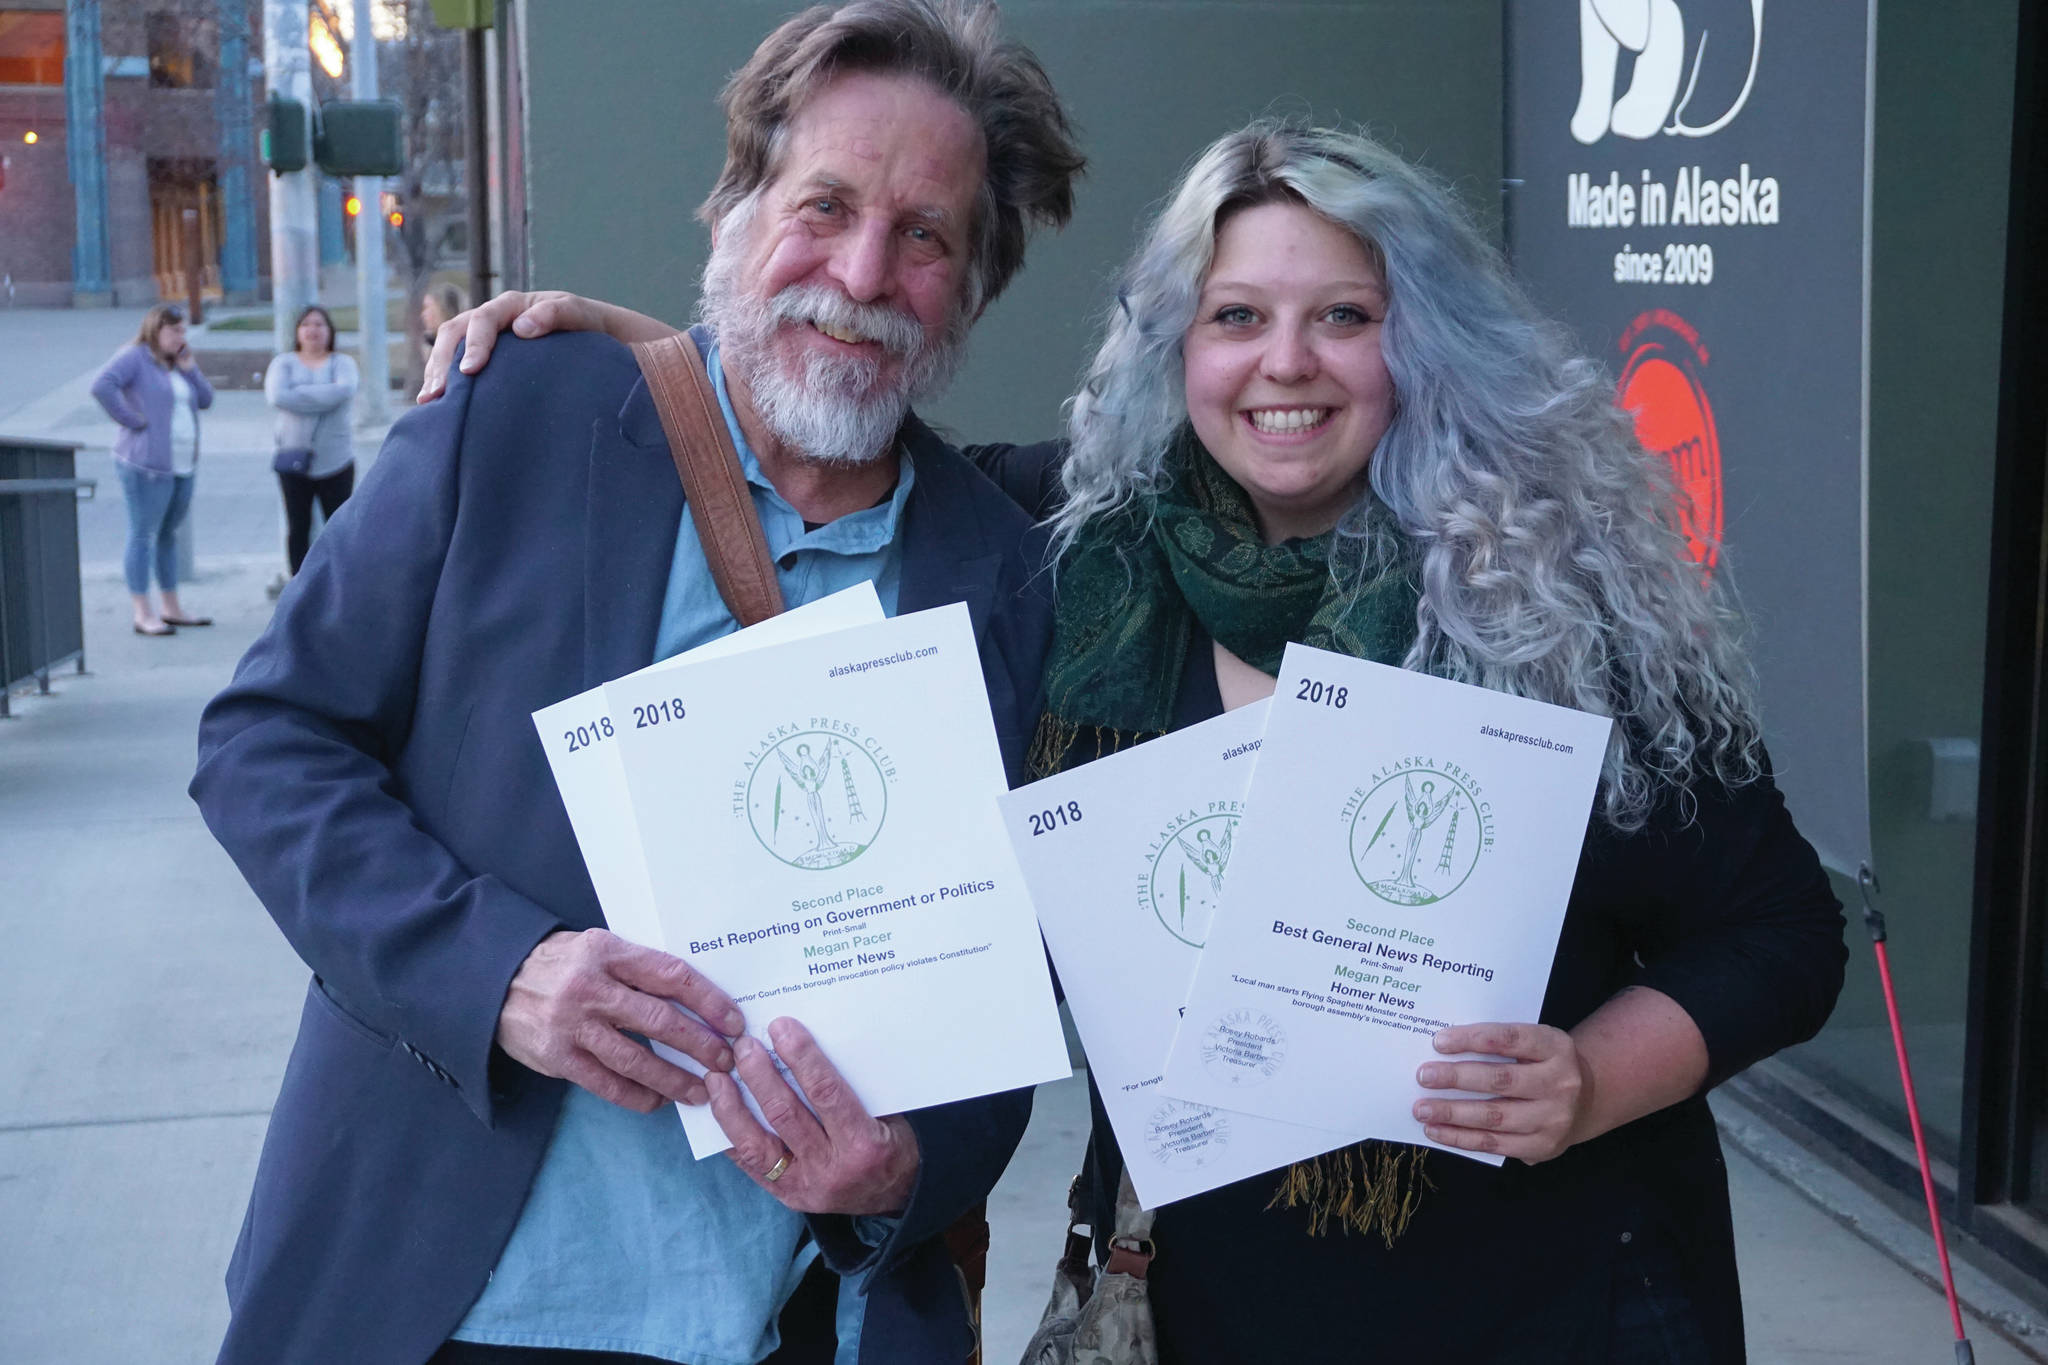 Homer News editor Michael Armstrong, left, and fomer reporter Megan Pacer, right, hold Alaska Press Club awards the Homer News received at the Alaska Press Club Awards banquet on April 27, 2019, in Anchorage, Alaska. (Photo by Brian Mazurek/Peninsula Clarion)